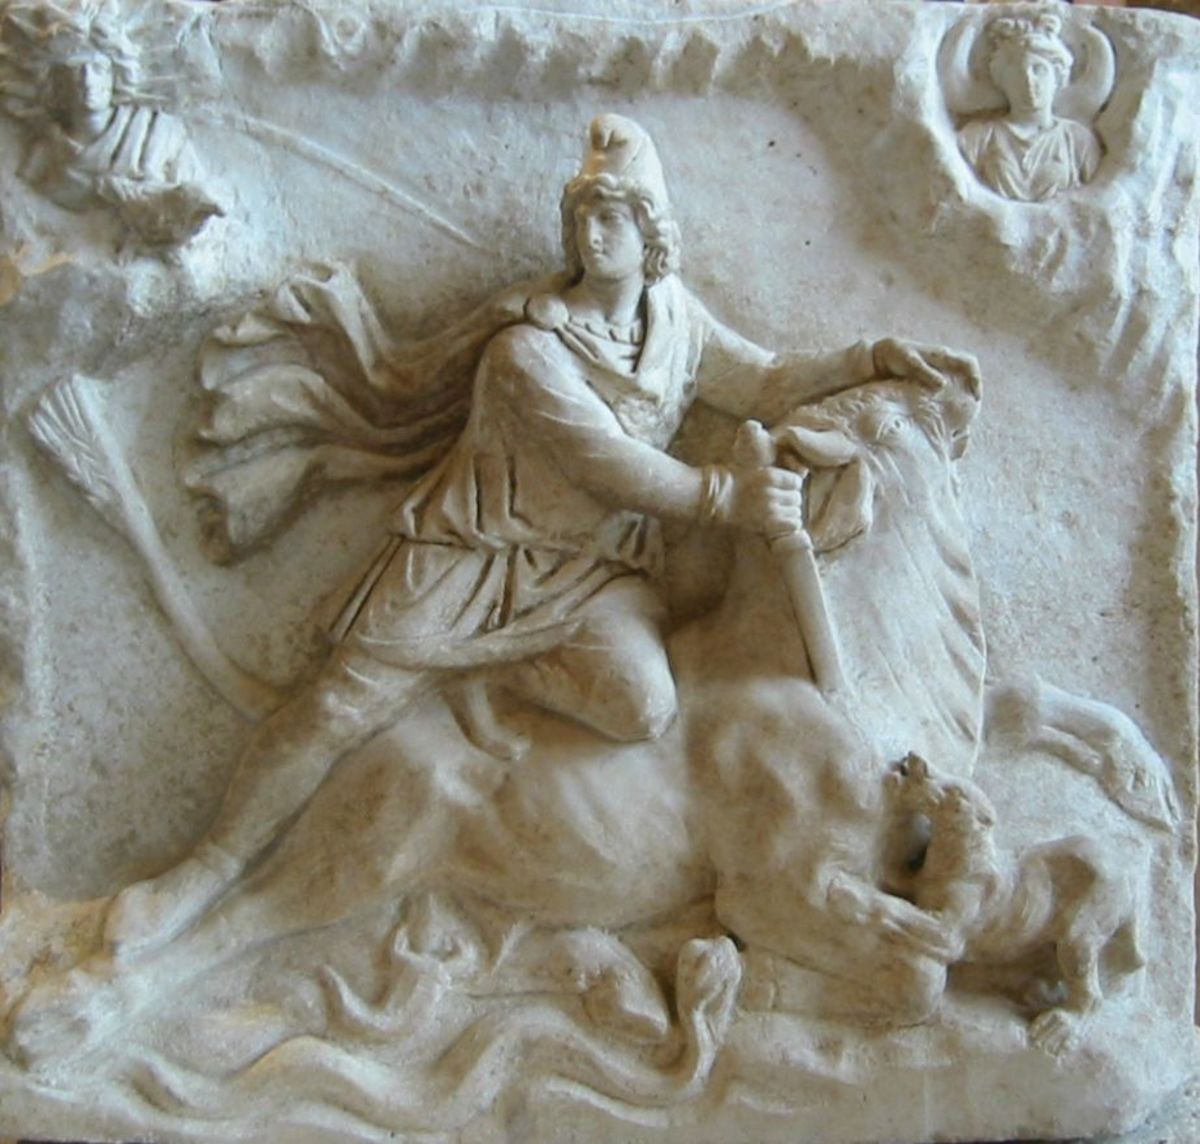 Mithra is shown slaying a bull.in a  2nd-3rd century Mithraic altarpiece found near Fiano Romano, near Rome, and now in the Louvre.